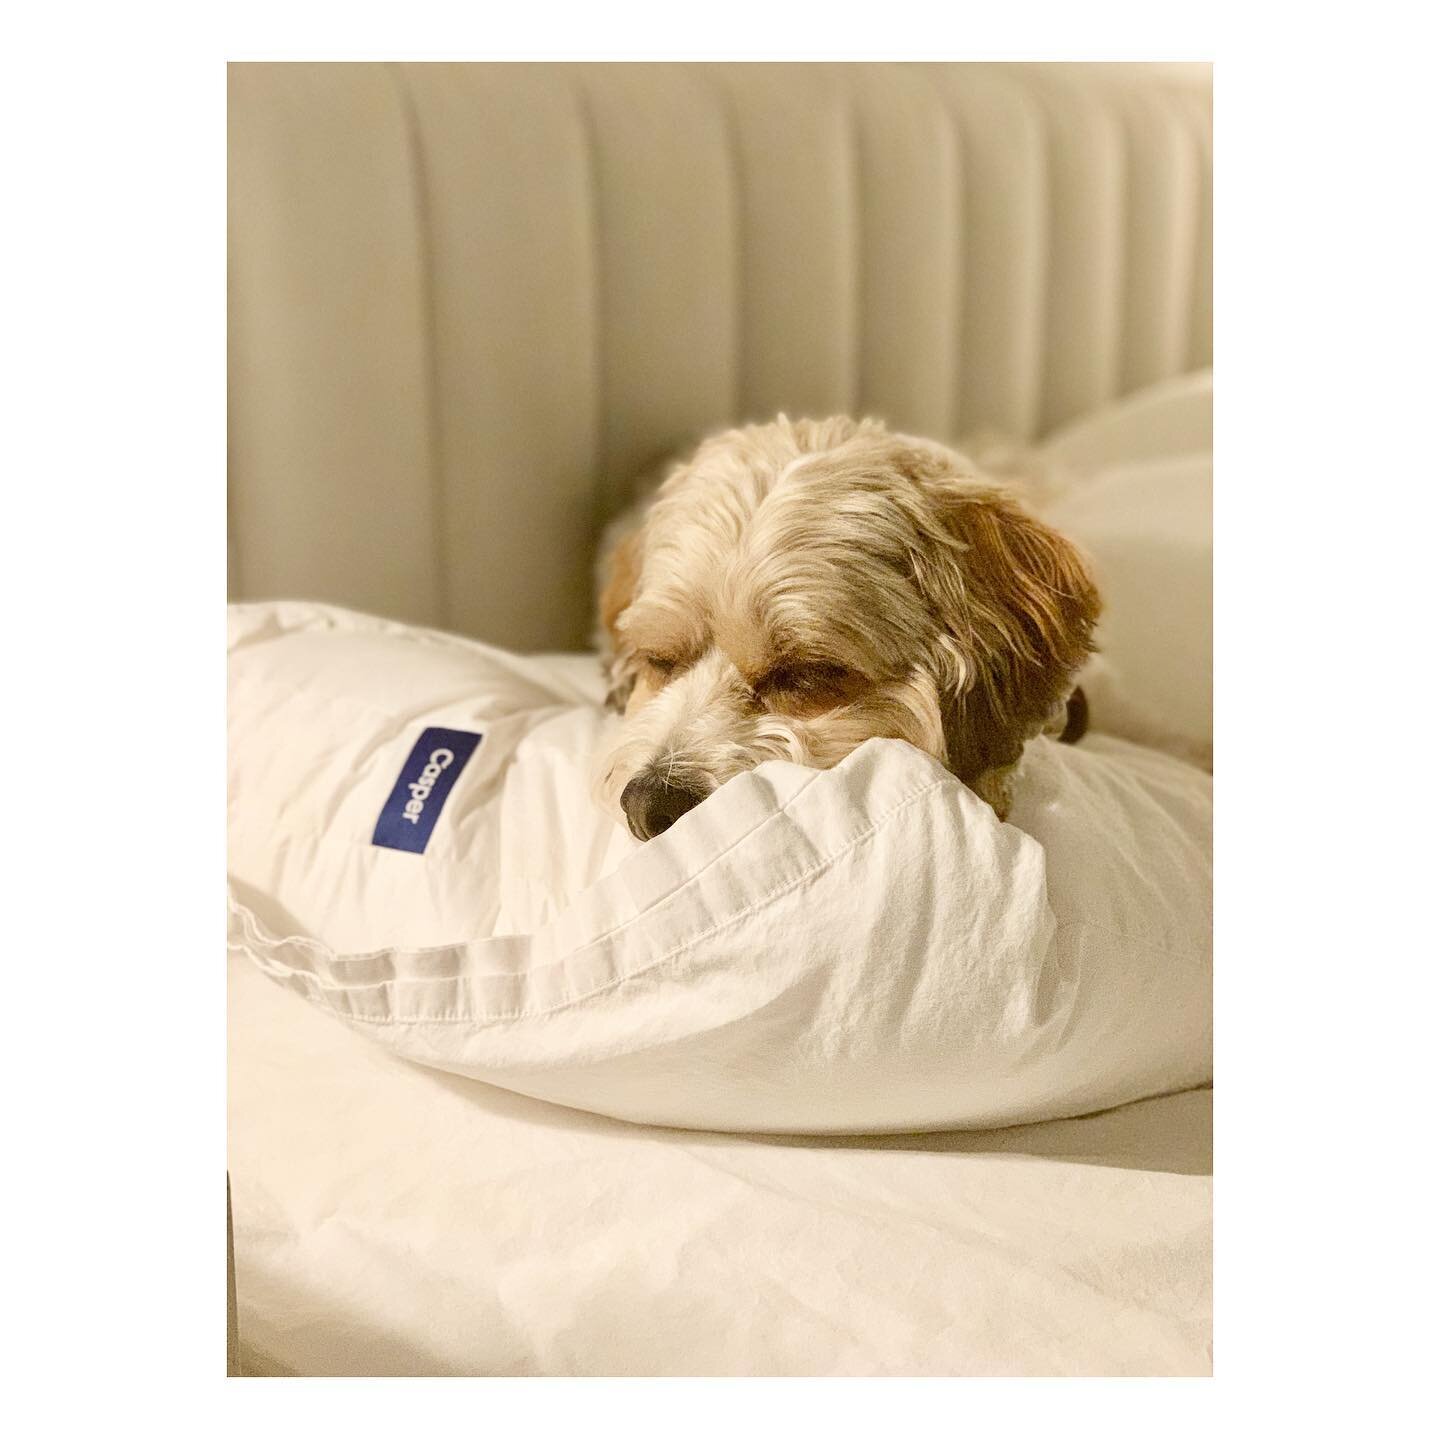 Anyone else love their @casper pillow as much as Teddy?! I can honestly say I have tried no less than a dozen different pillows and this has been my personal favorite. I always tell my clients spend your money where you spend most of your time ie. ma